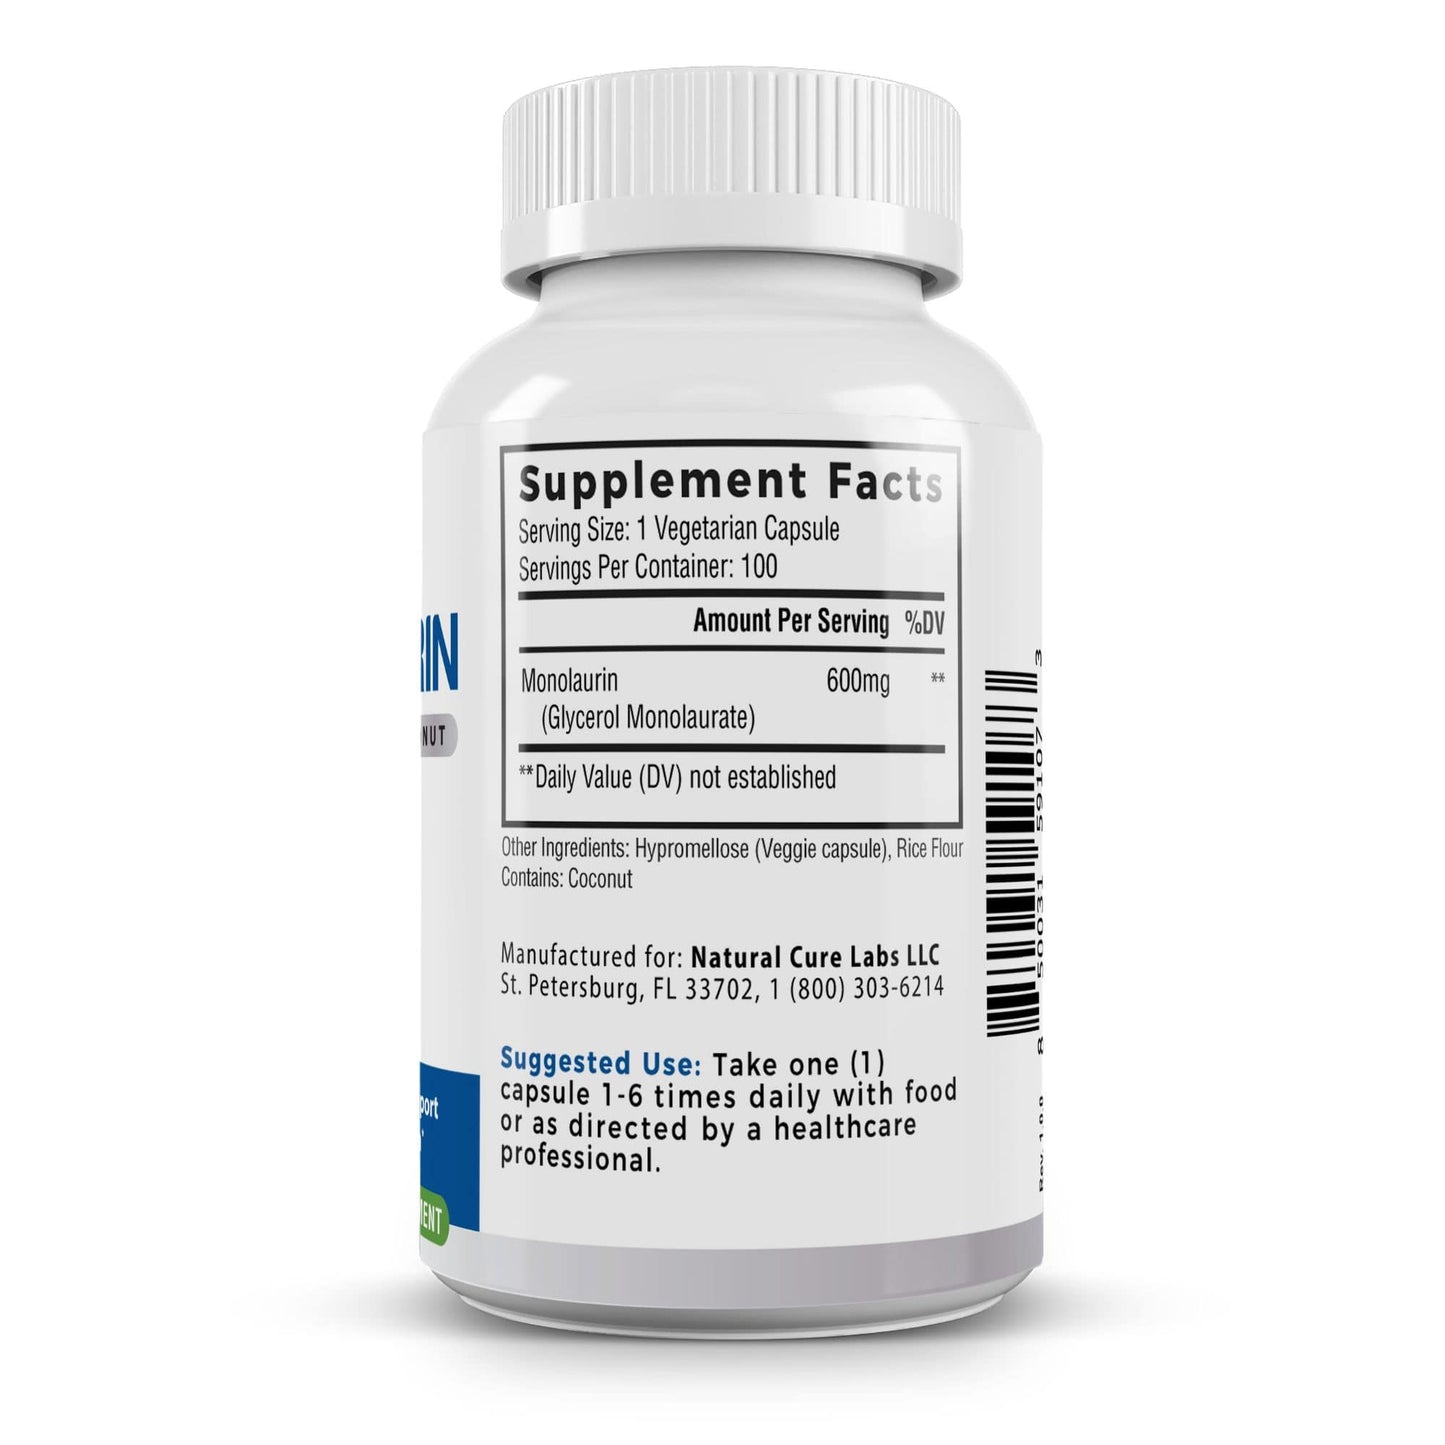 Right side view of the Palmara Health Monolaurin 600mg dietary supplement bottle, showing supplement facts for a serving size of one vegetarian capsule and 600mg of Monolaurin per serving, with a total of 100 servings per container